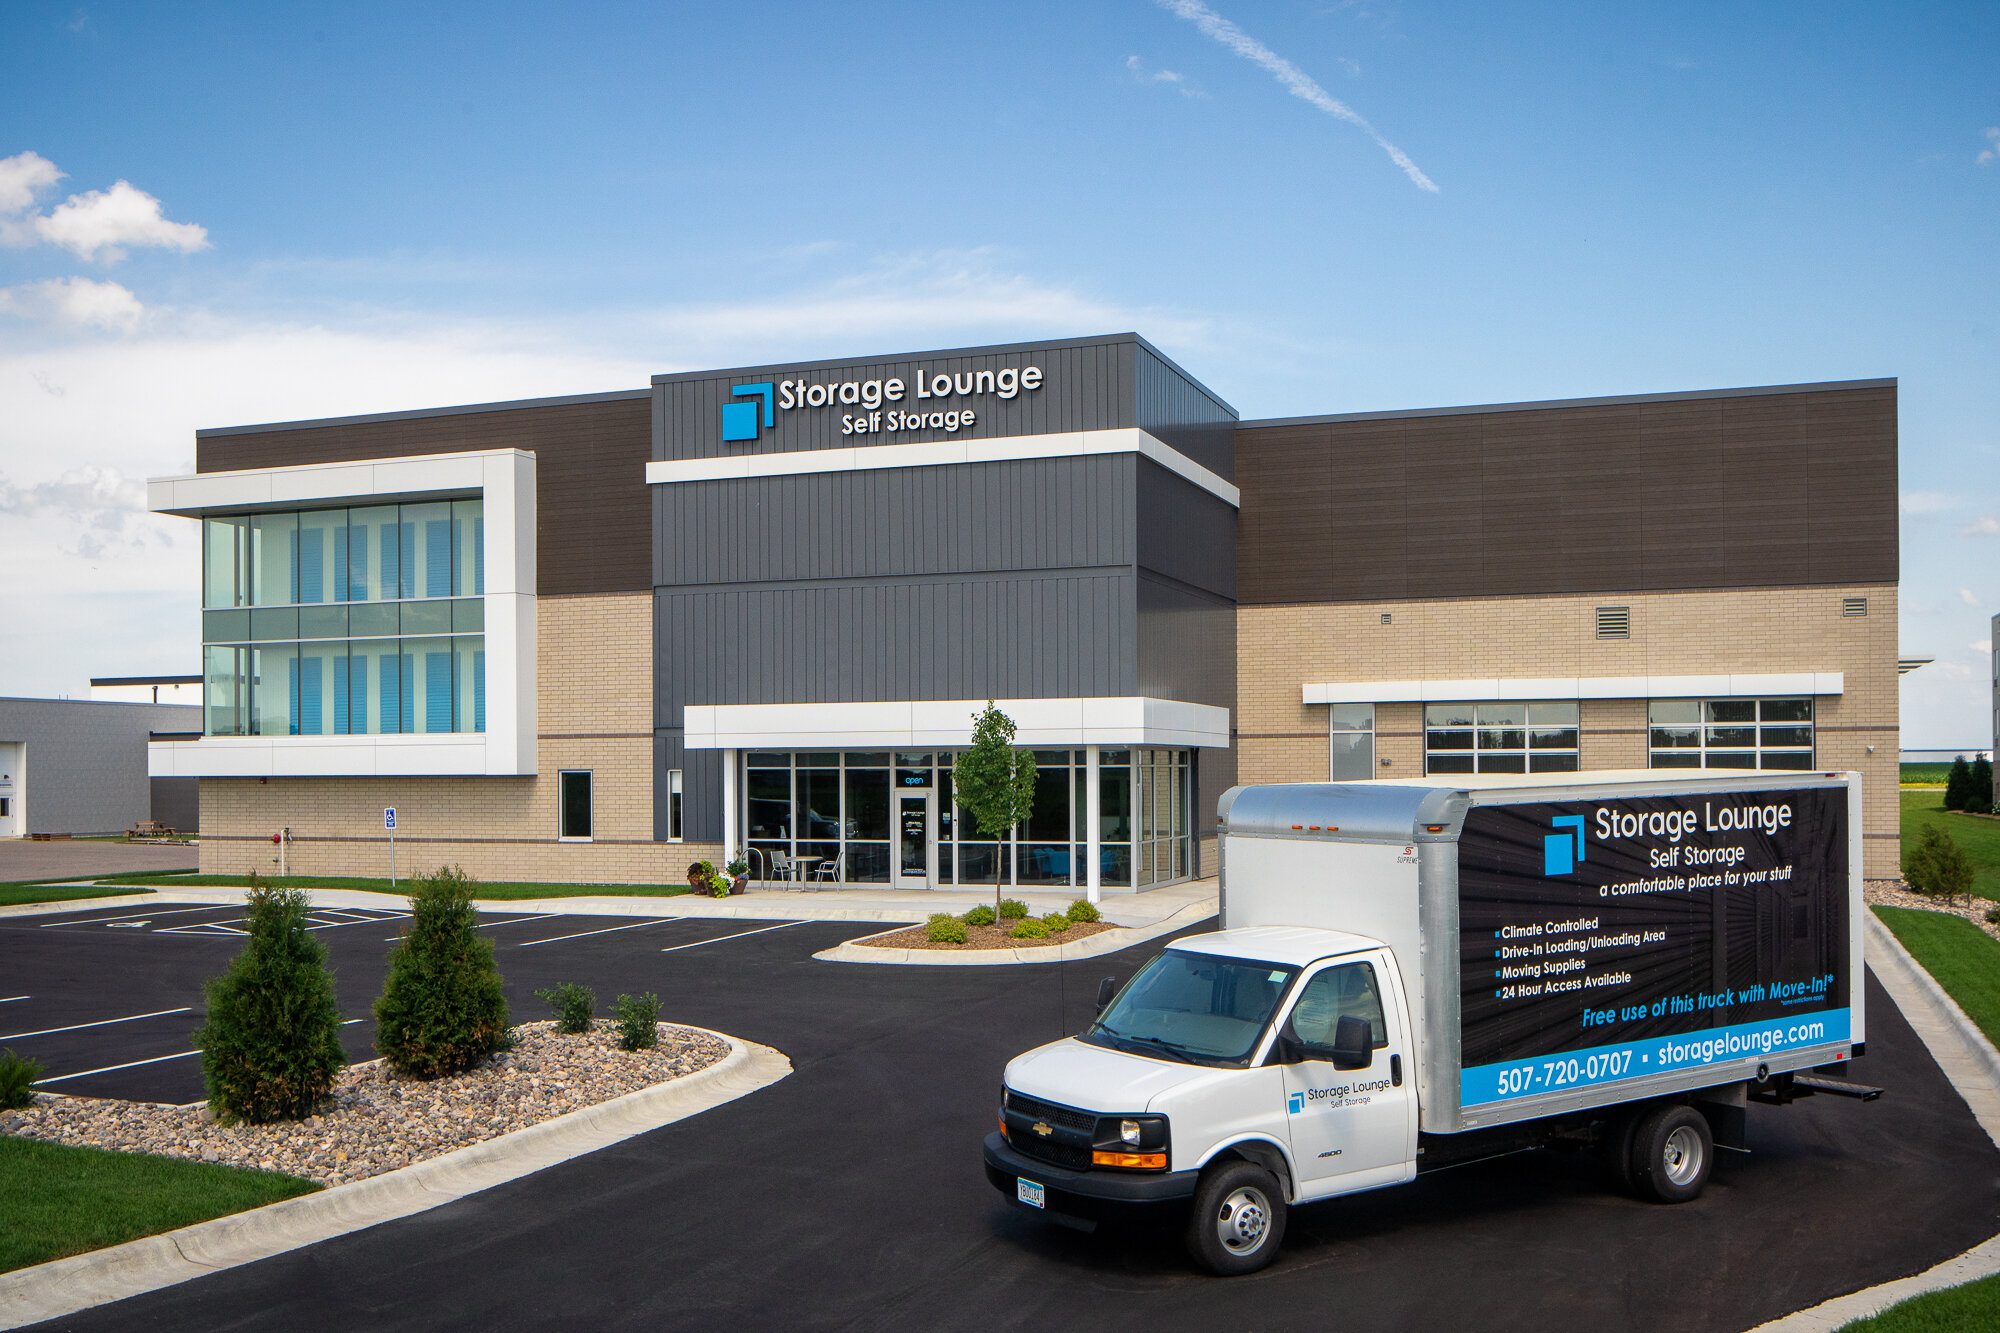 Storage Lounge in Mankato, MN featuring branded moving truck